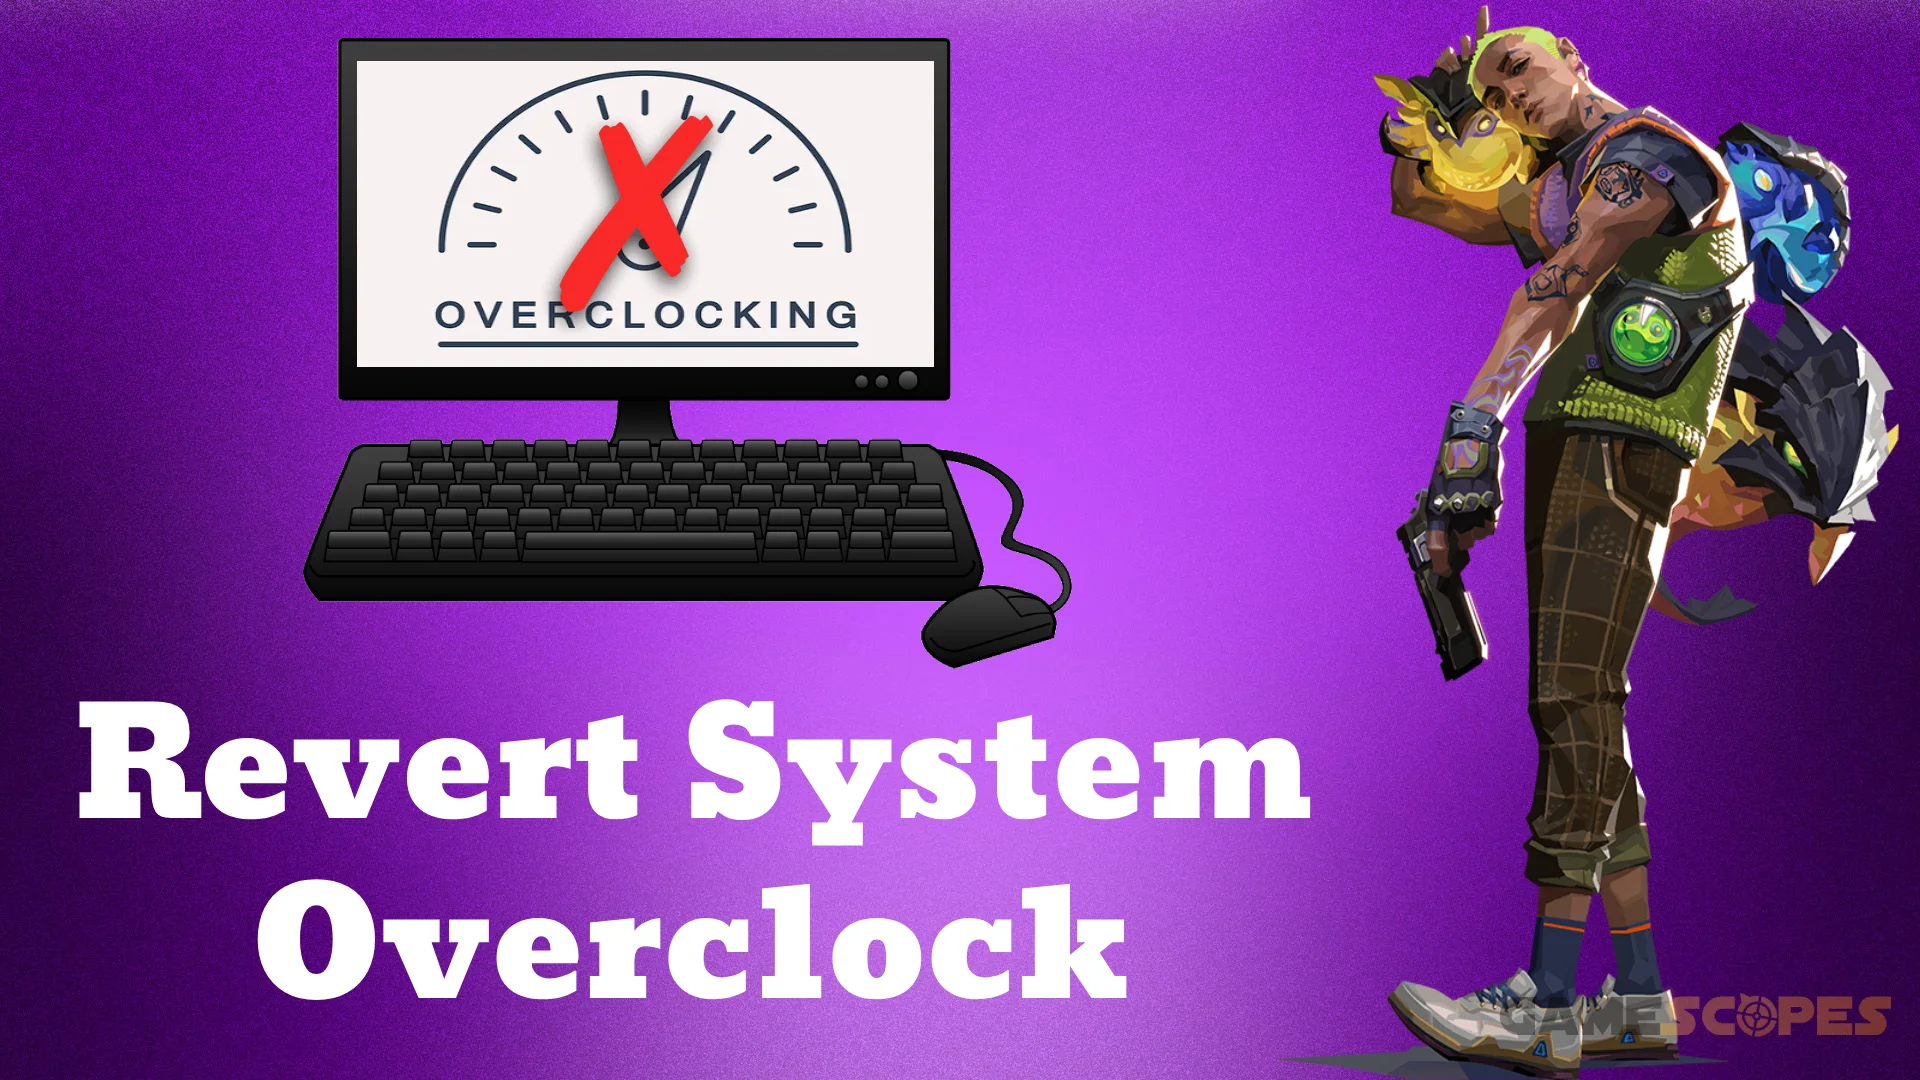 When Valorant keeps crashing on startup, you'll need to revert any system overclocking.